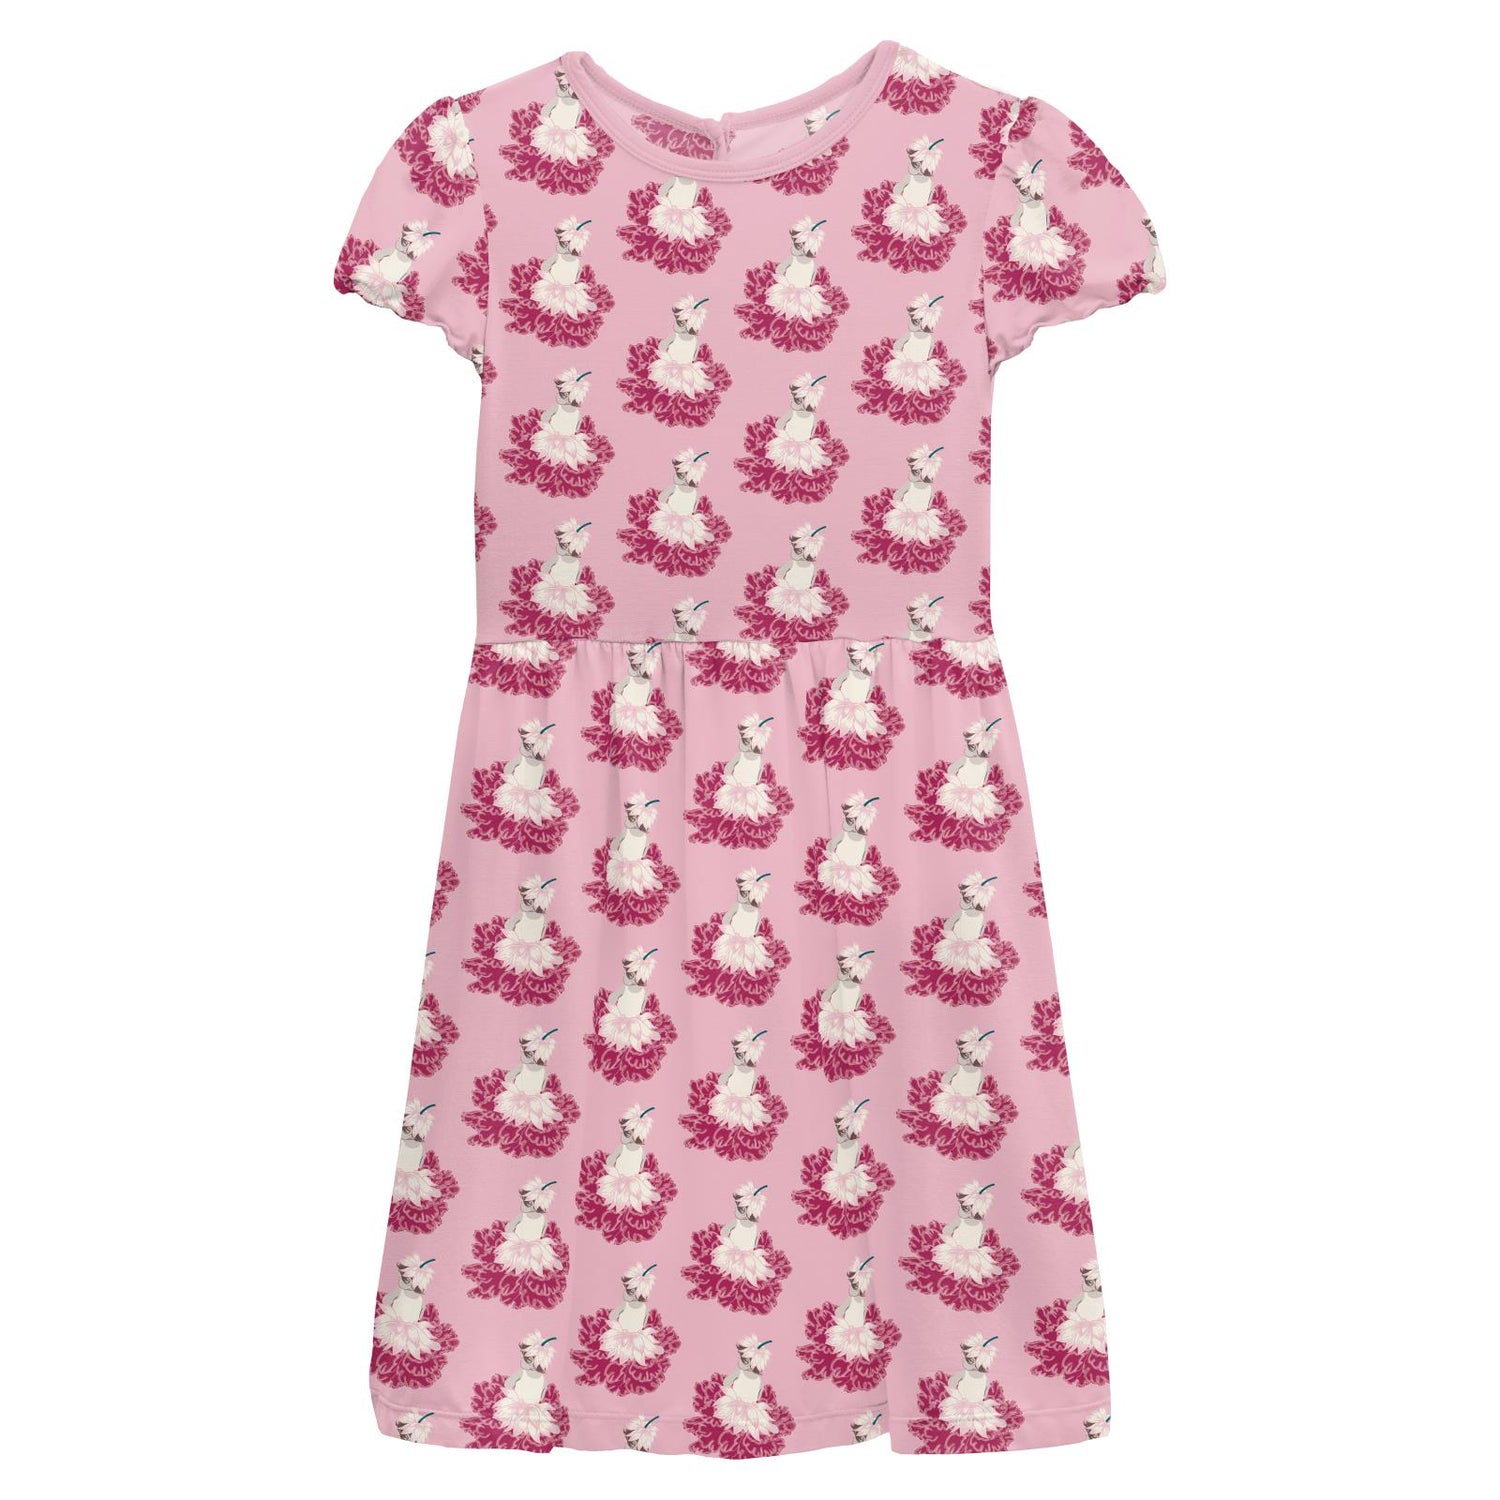 Print Flutter Sleeve Twirl Dress with Pockets in Cake Pop Thumbelina